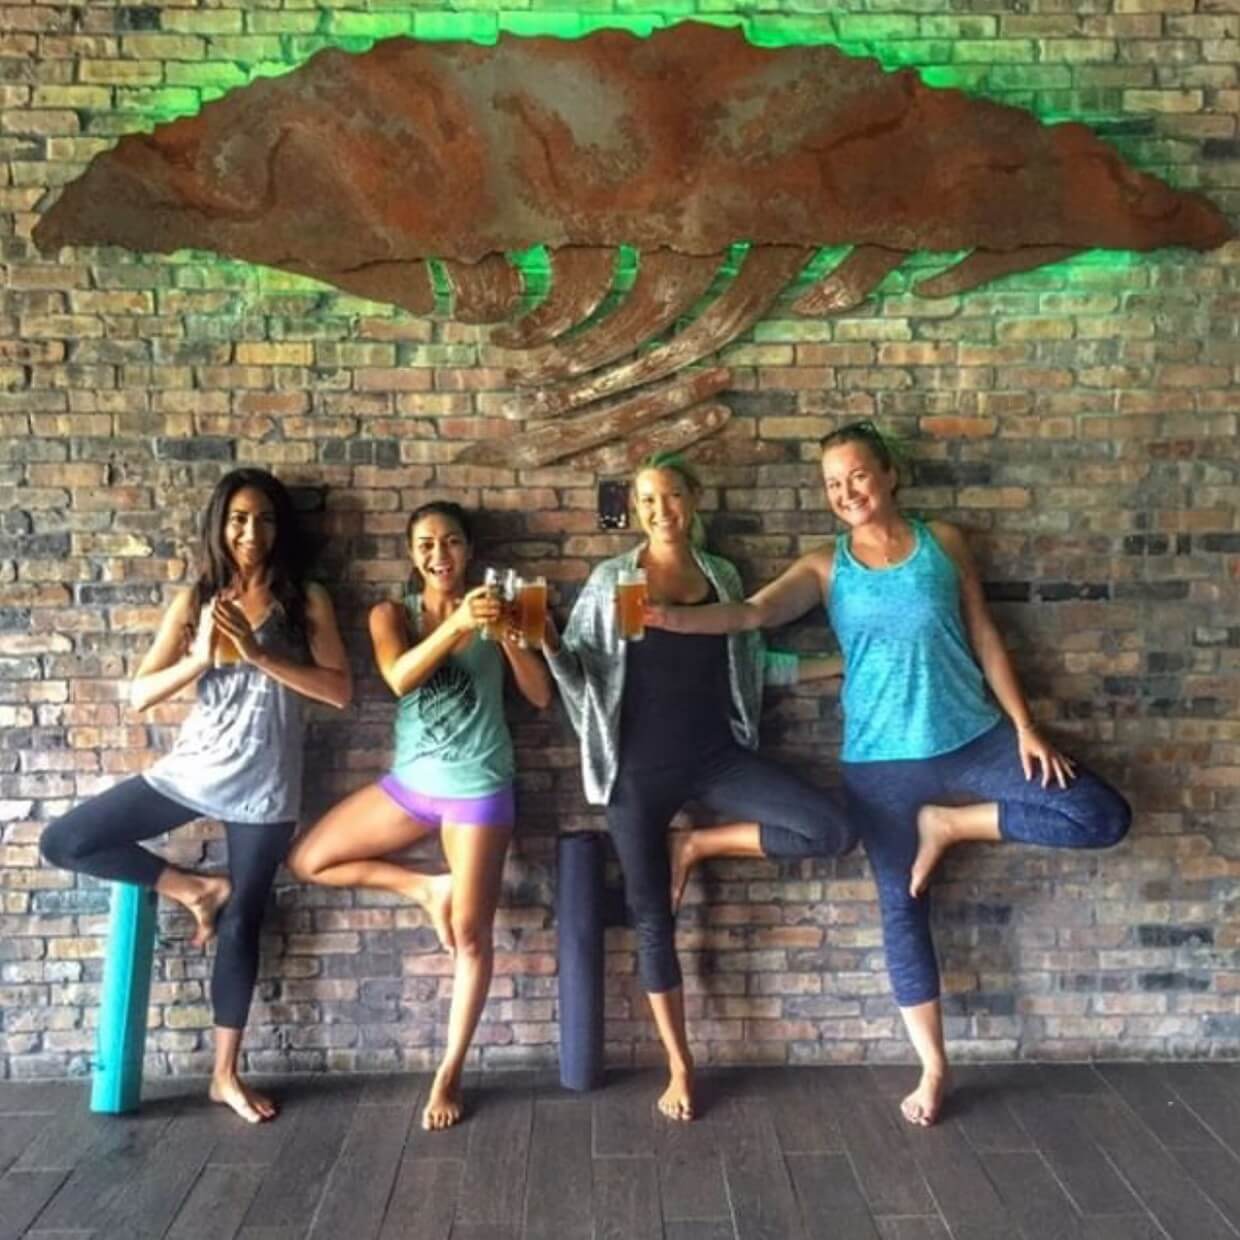 Beer Yoga at Twisted Trunk Brewery in Palm Beach Gardens Florida